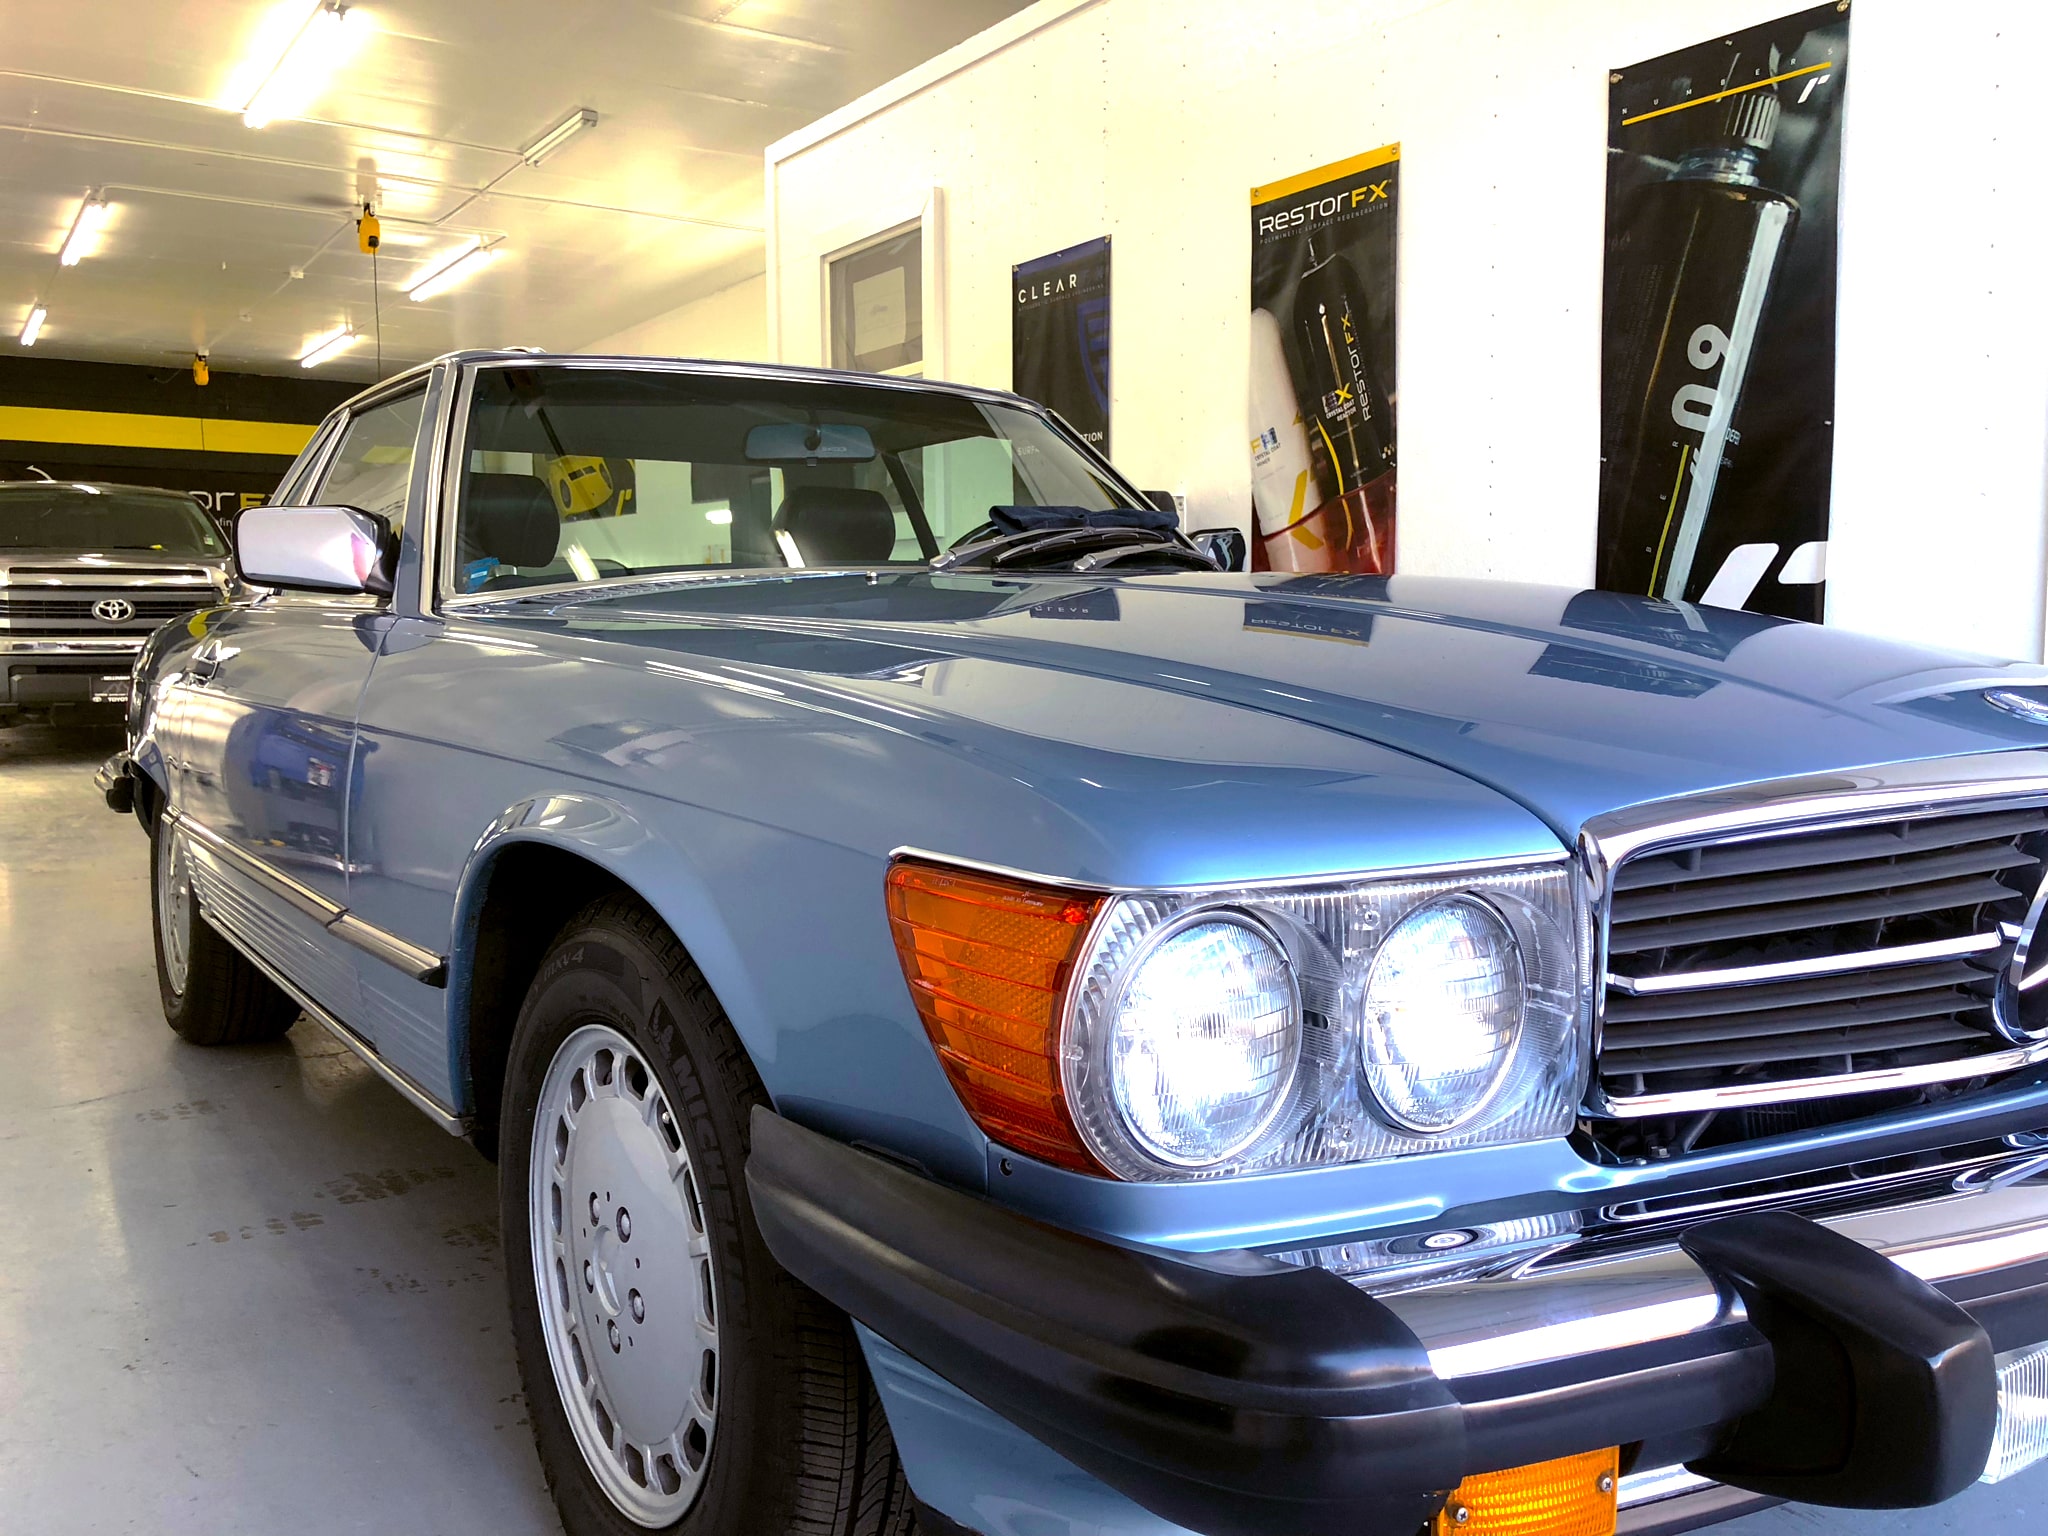 Brilliantly clear, reflective, shiny, glossy and smooth classic blue Mercedes car after ClearFX protection maintenance